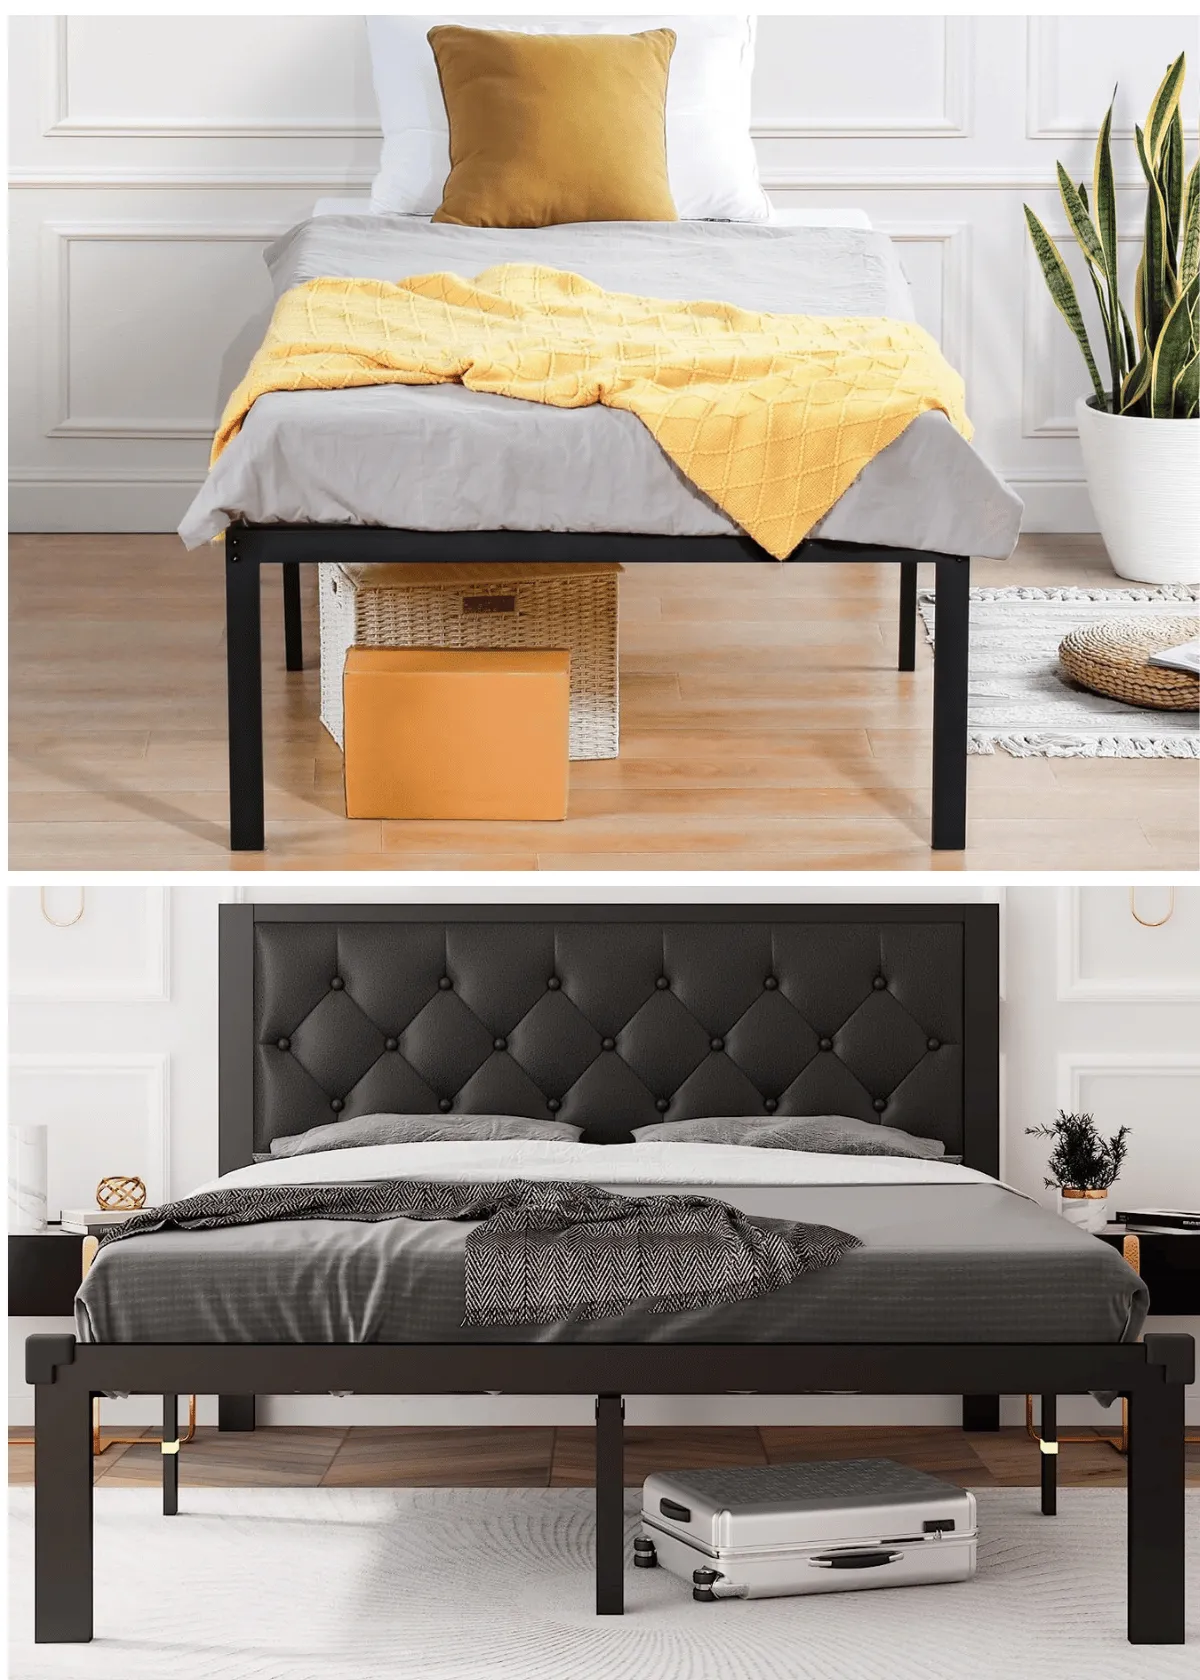 "Is the High Bed Frame Your Ultimate Space-Saving Solution?"